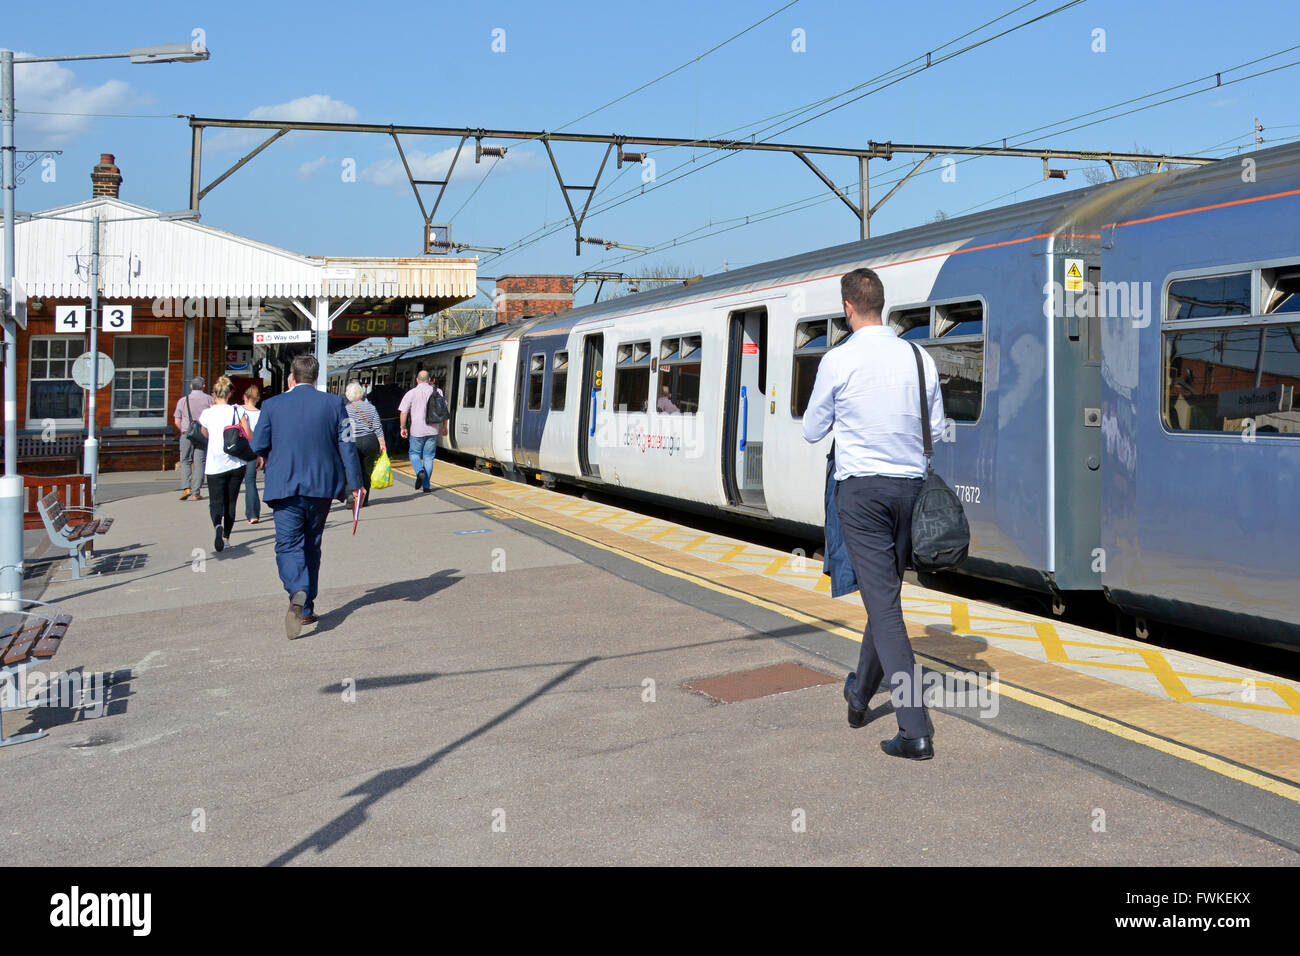 Rail Passengers High Resolution Stock Photography and Images - Alamy